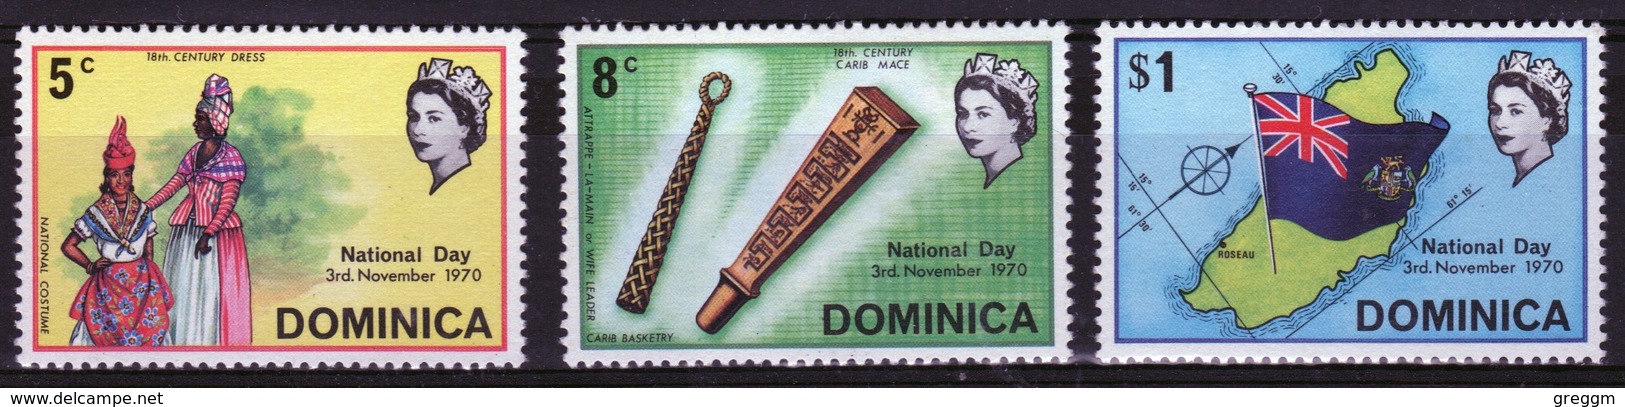 Dominica Set Of Stamps To Celebrate National Day 1970. - Dominica (...-1978)